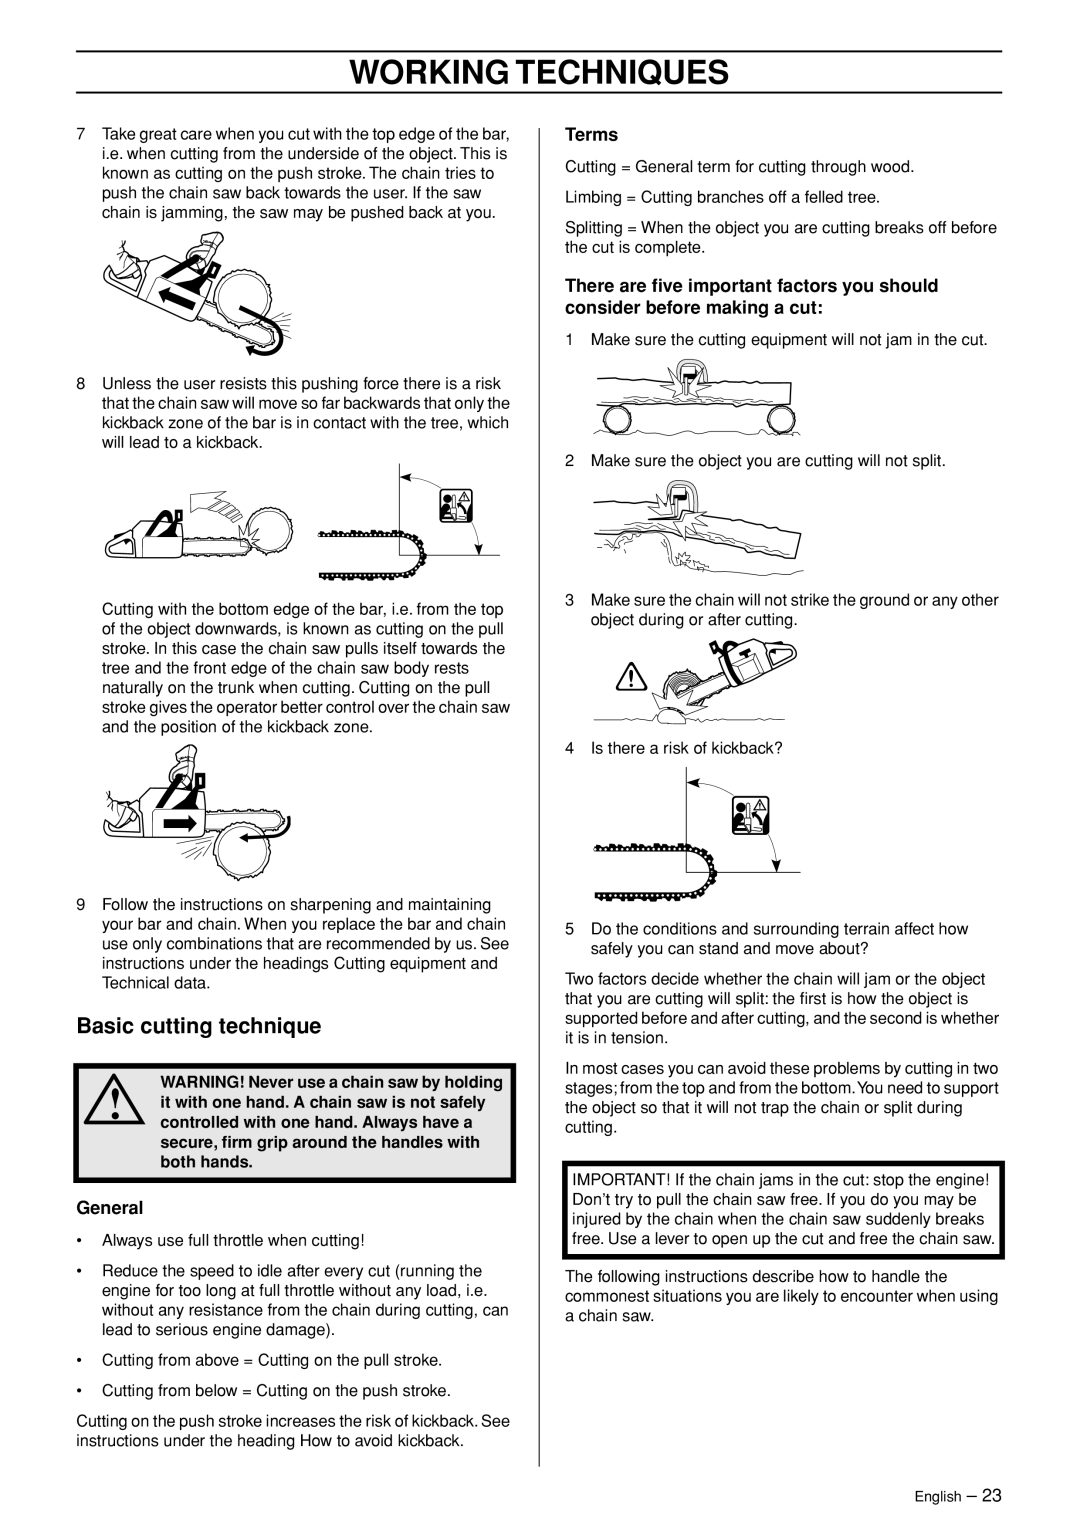 Husqvarna 455 RANCHER manual Basic cutting technique, General, Terms, WARNING! Never use a chain saw by holding 